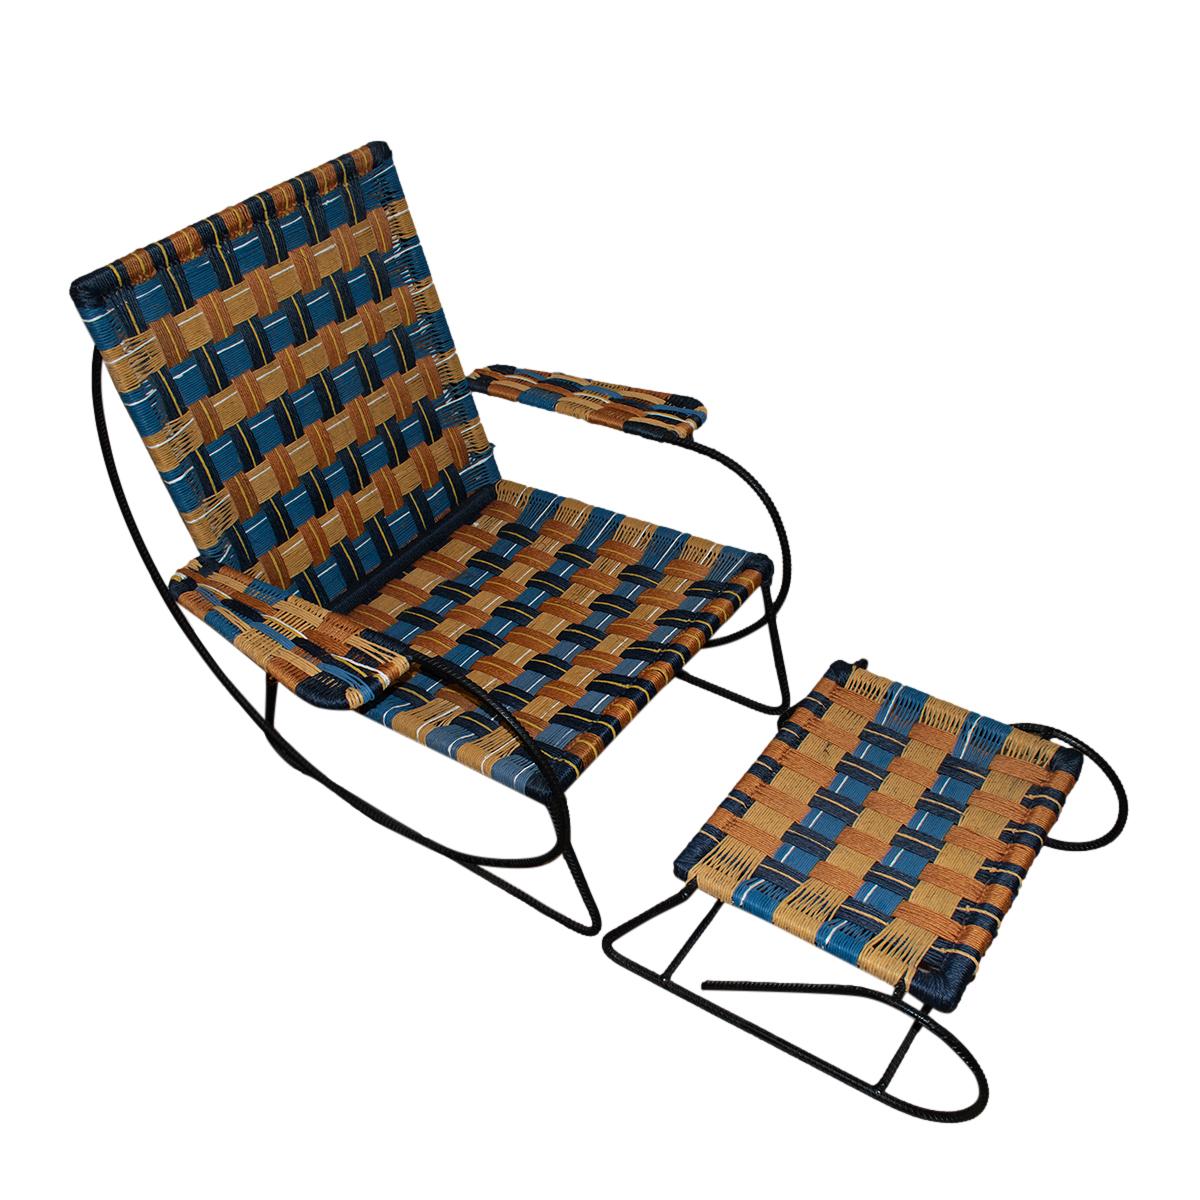 Marni Zooterico Interiors Orange & Navy Woven Twine Chair & Footstool

- Limited collection Marni x Farfetch collaboration lunched in 2020 representing 12 zodiac signs
- Woven twine in deep orange, yellow, navy and baby blue hues
- Handmade metal